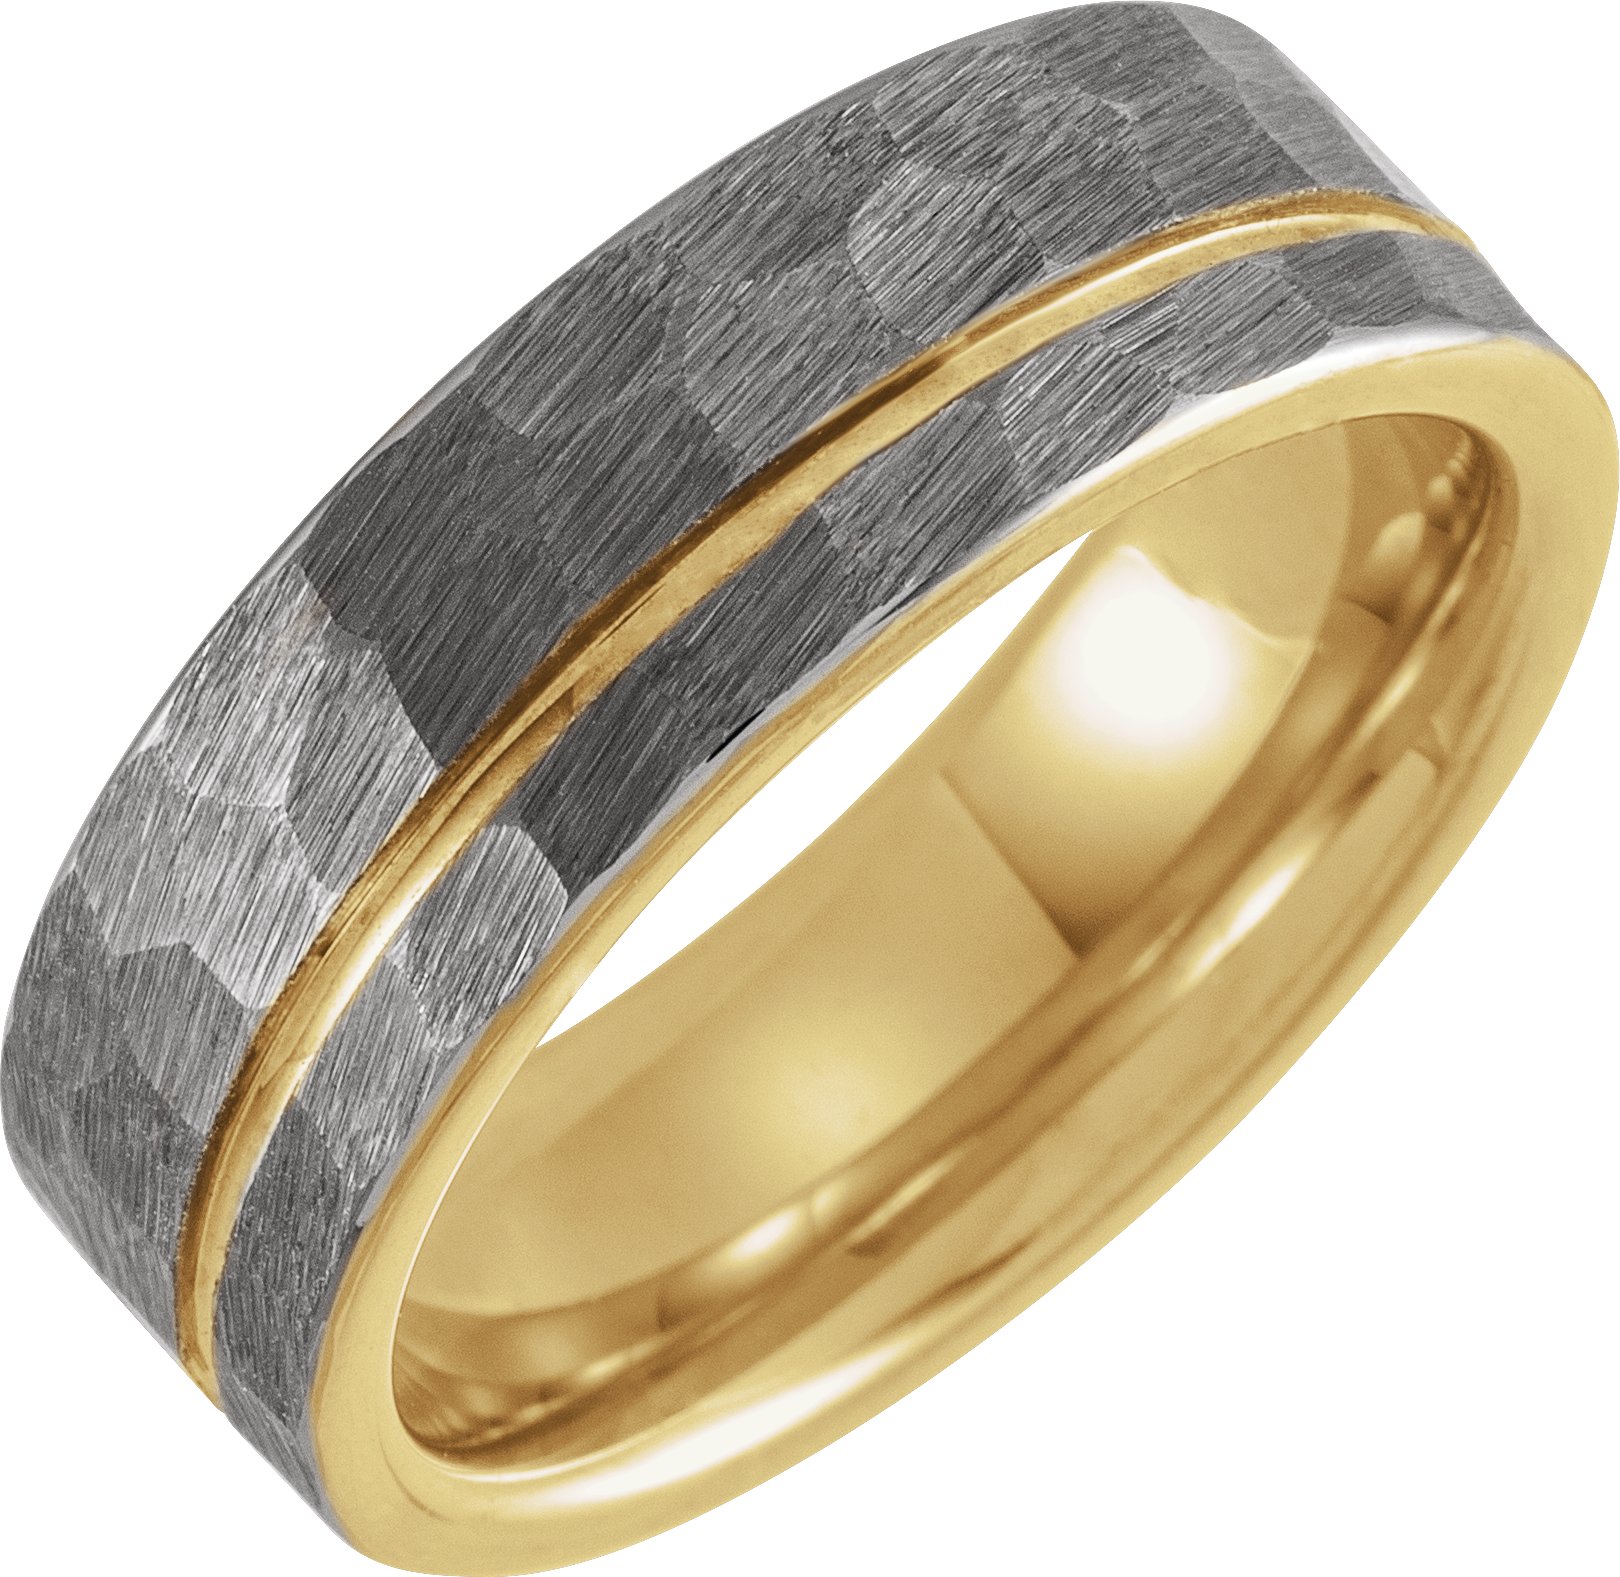 18K Yellow Gold PVD Tungsten 8 mm Flat Grooved Hammered Band Size 9.5 